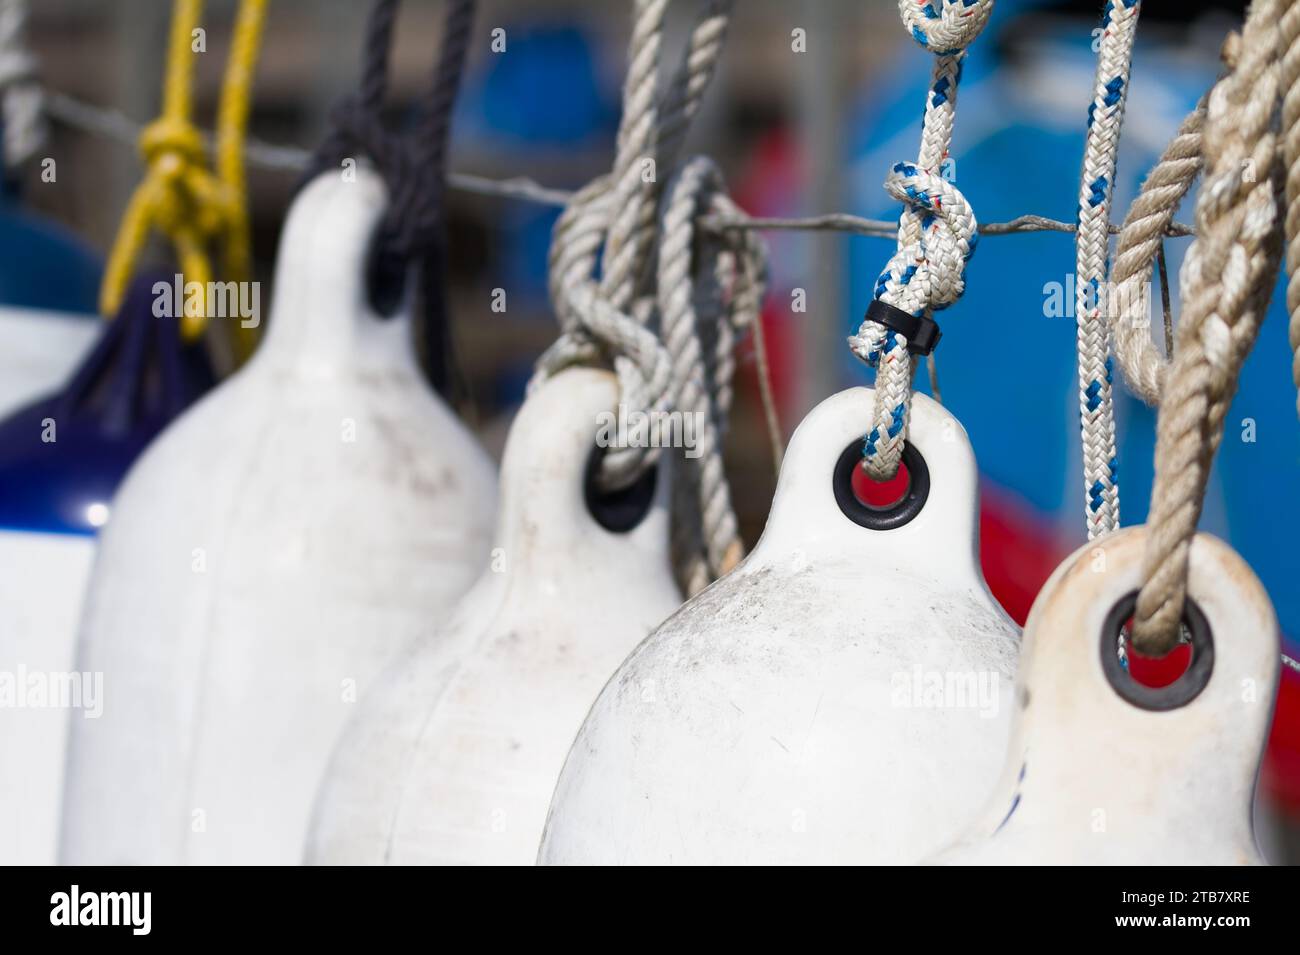 Row Of Plastic Rubber Fenders Tied Up To A Jetty, Dock, Christchurch Harbour UK Stock Photo